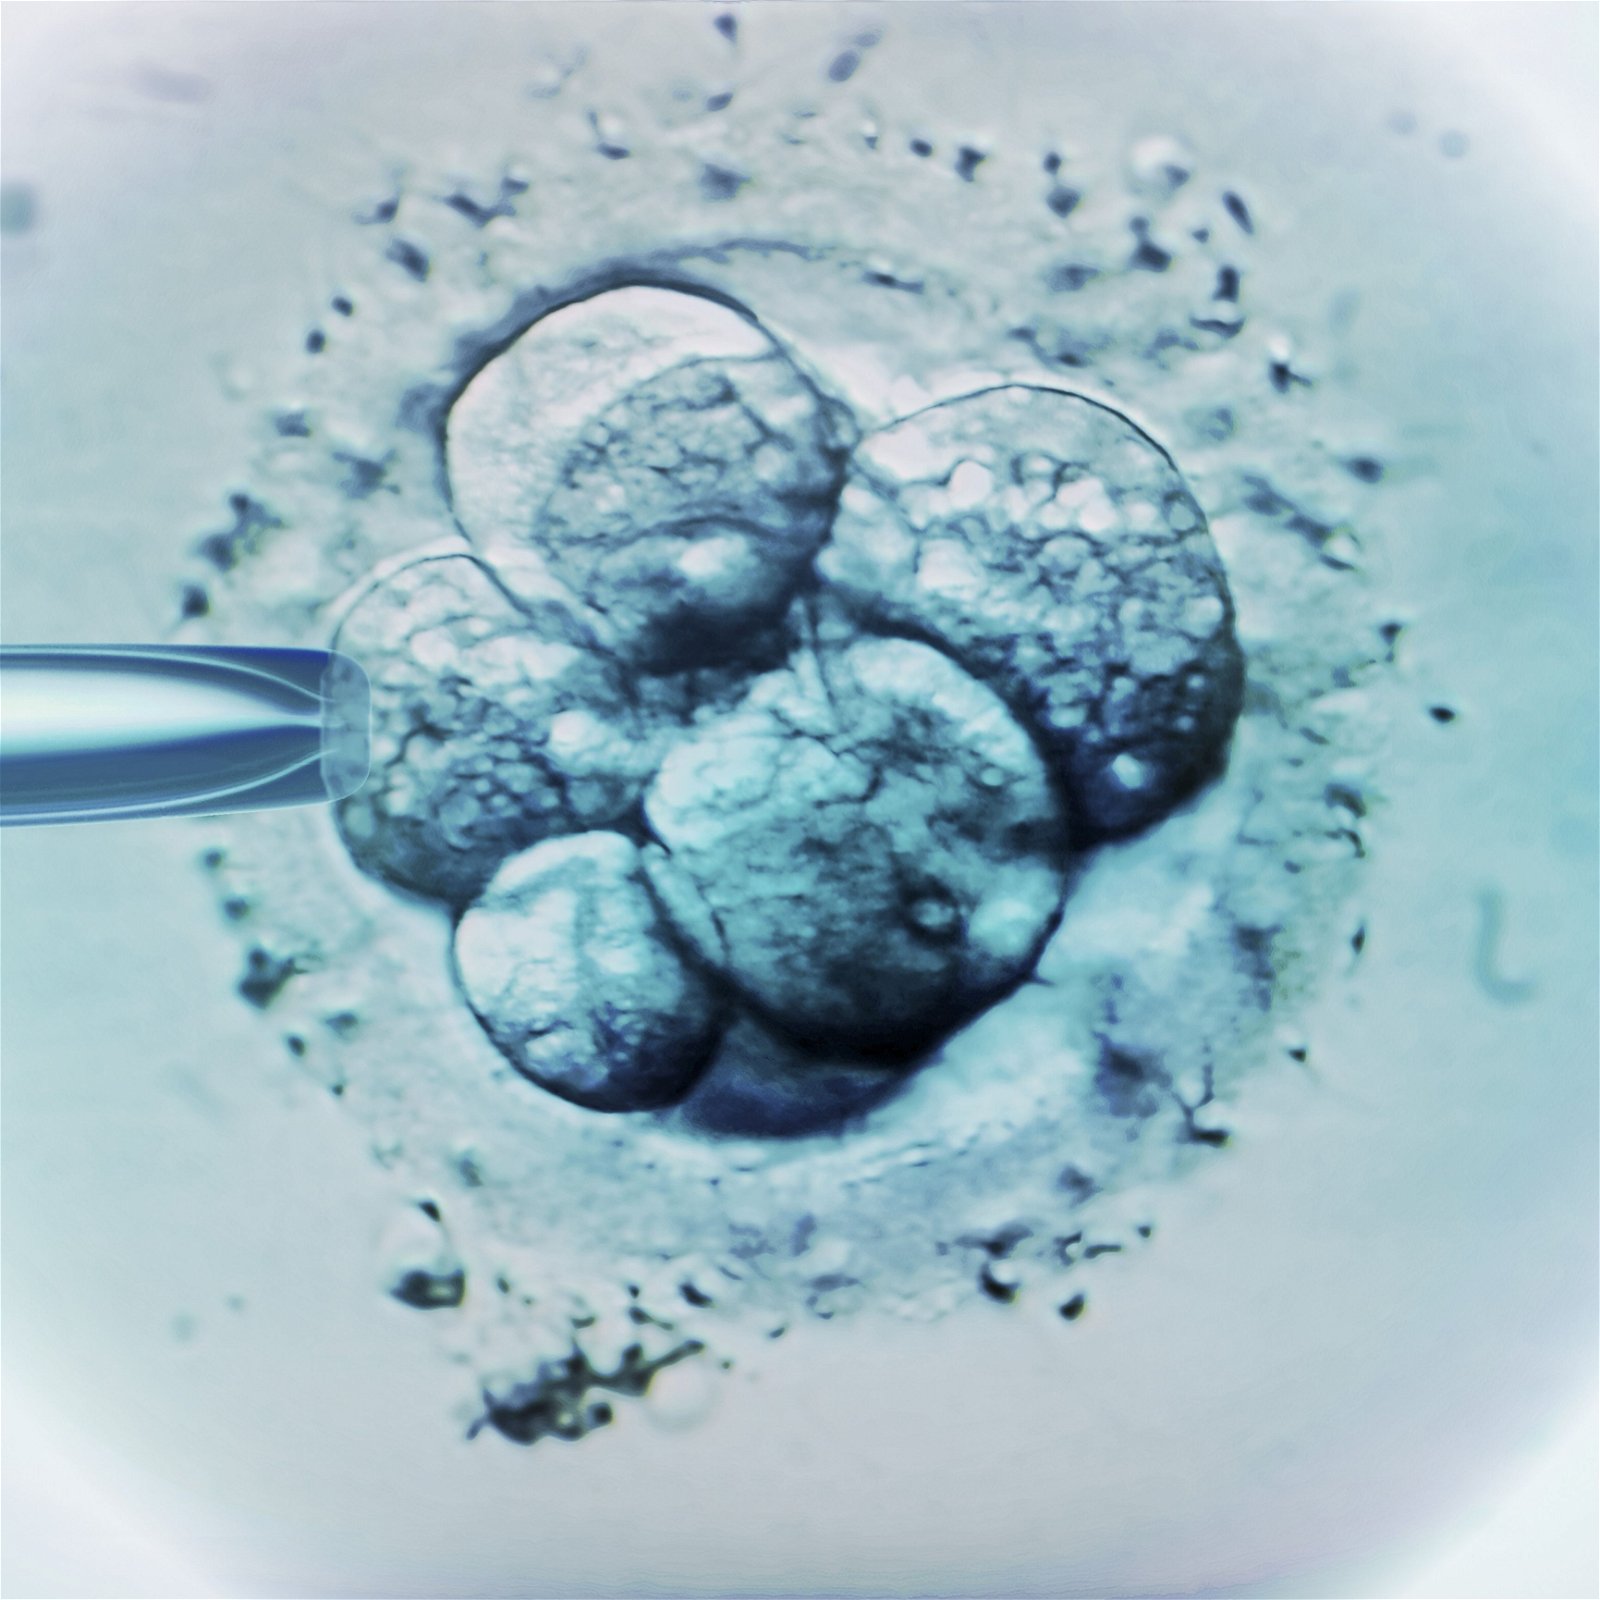 This IVF Ruling Is the Logical End of the Anti-Choice 'Personhood' Scam